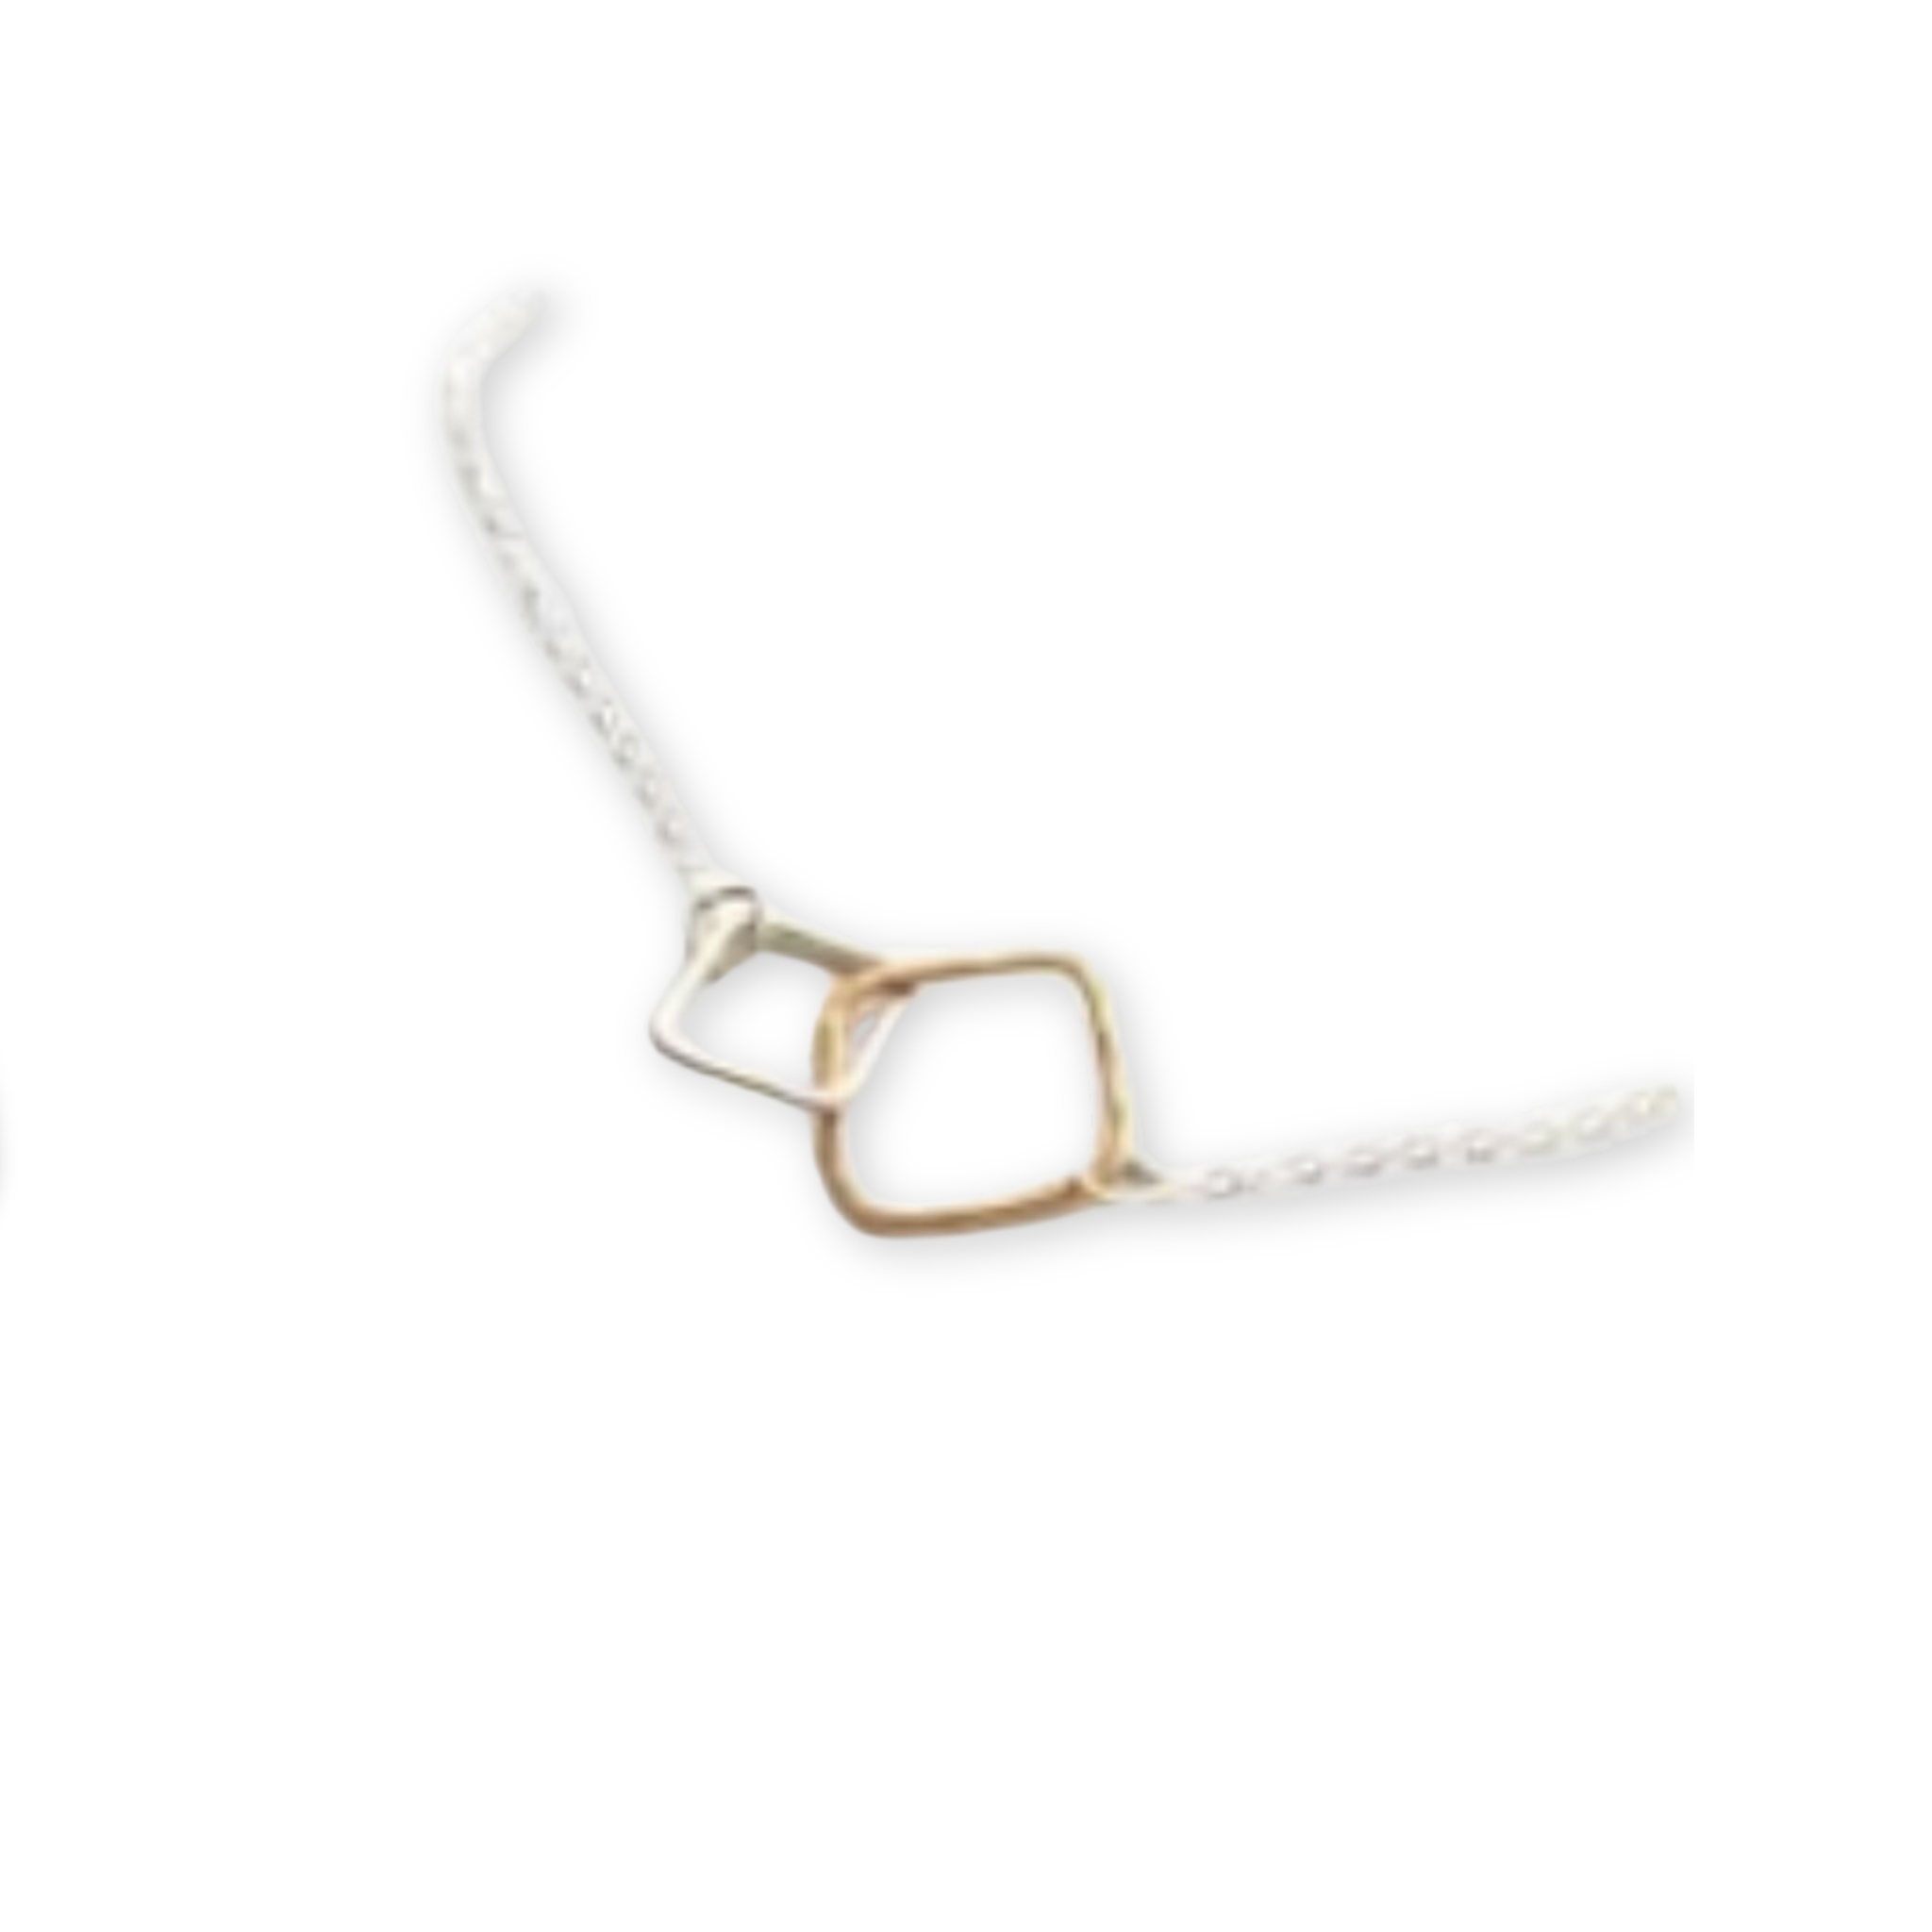 two interlocked hammered square pendants suspended from a small tiny necklace chain